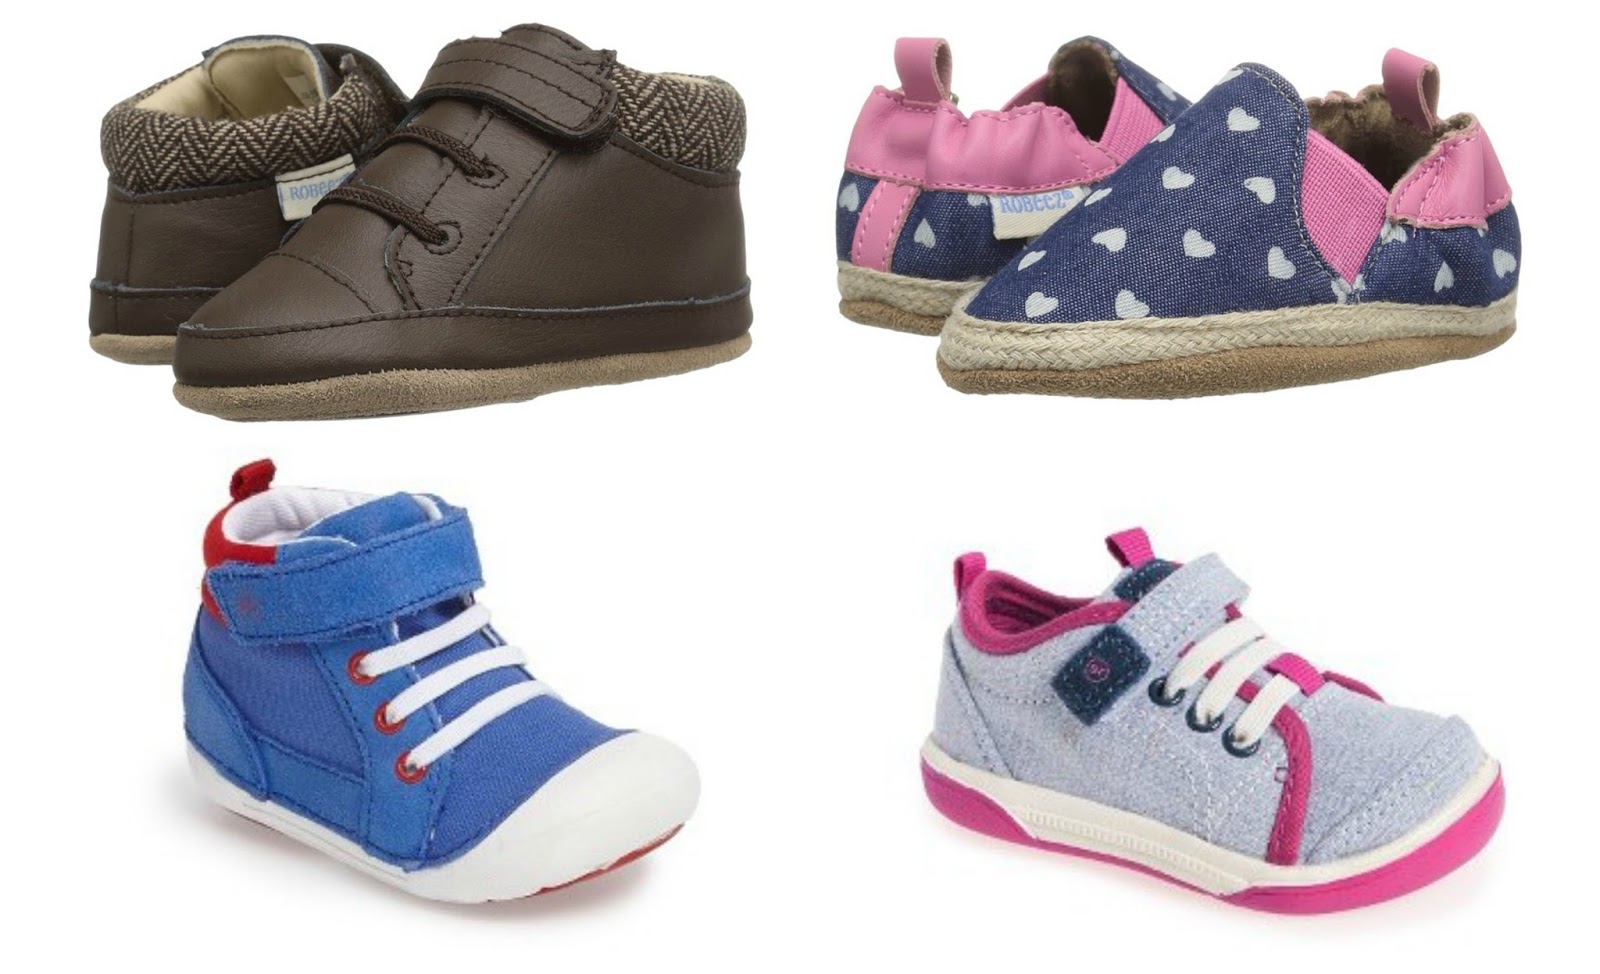 BLOB: The Best Baby and Toddler Shoes